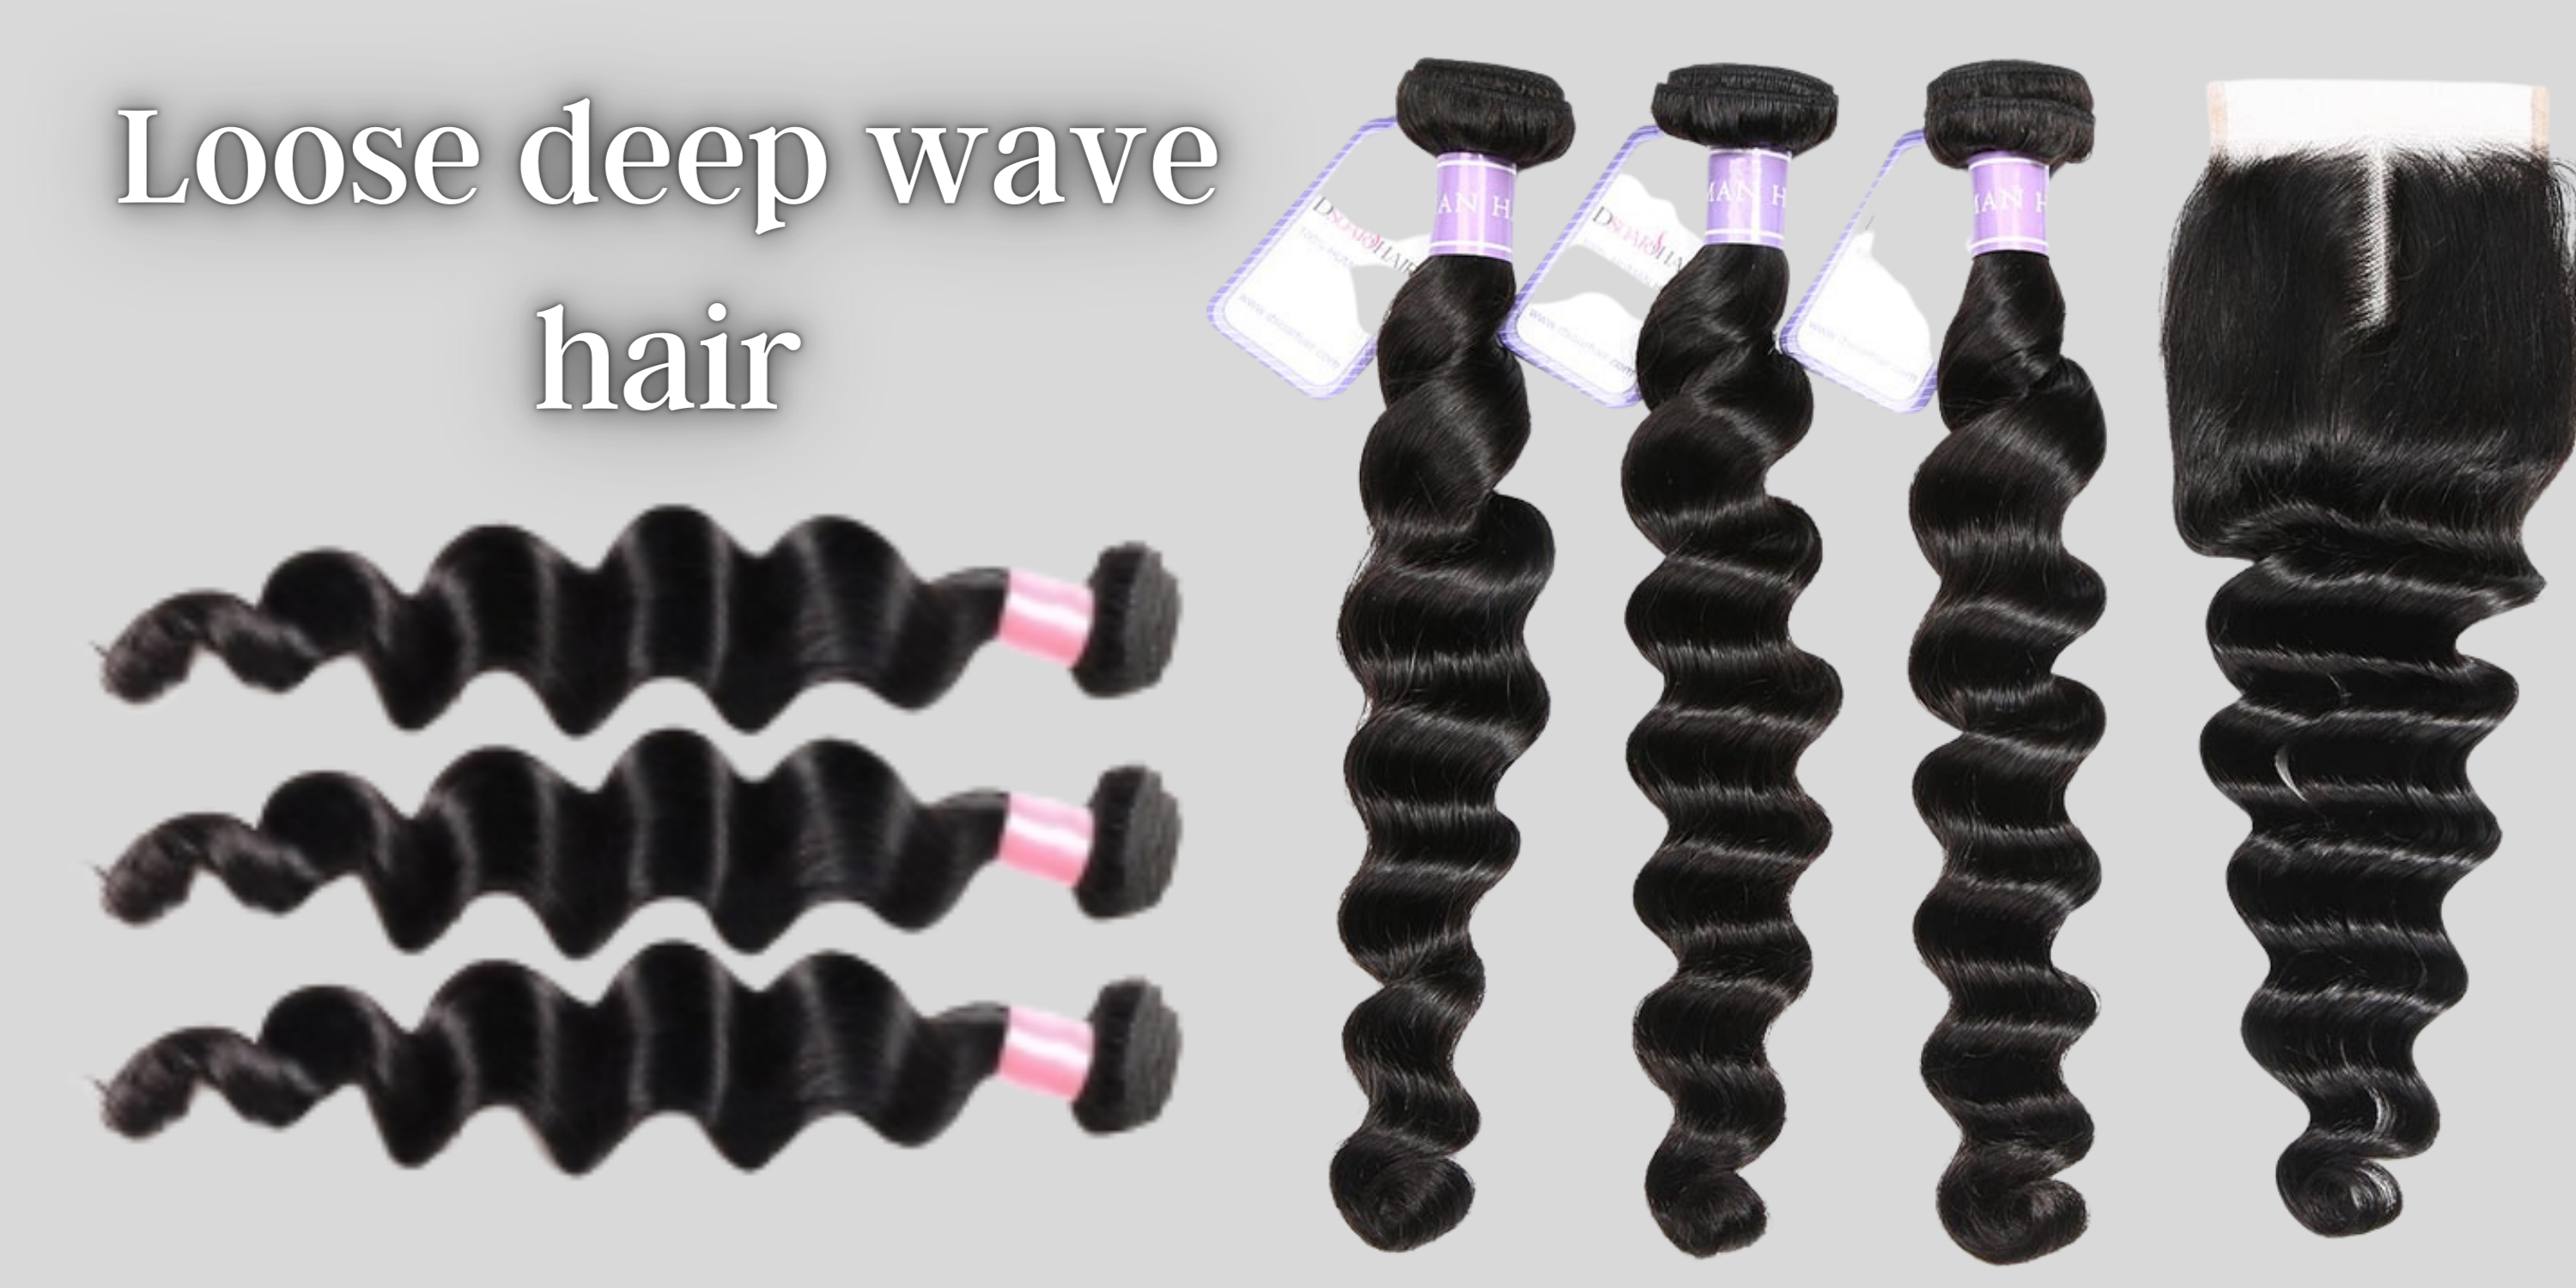 You Never Thought That Owning A Loose Deep Hair Could Be So Beneficial!